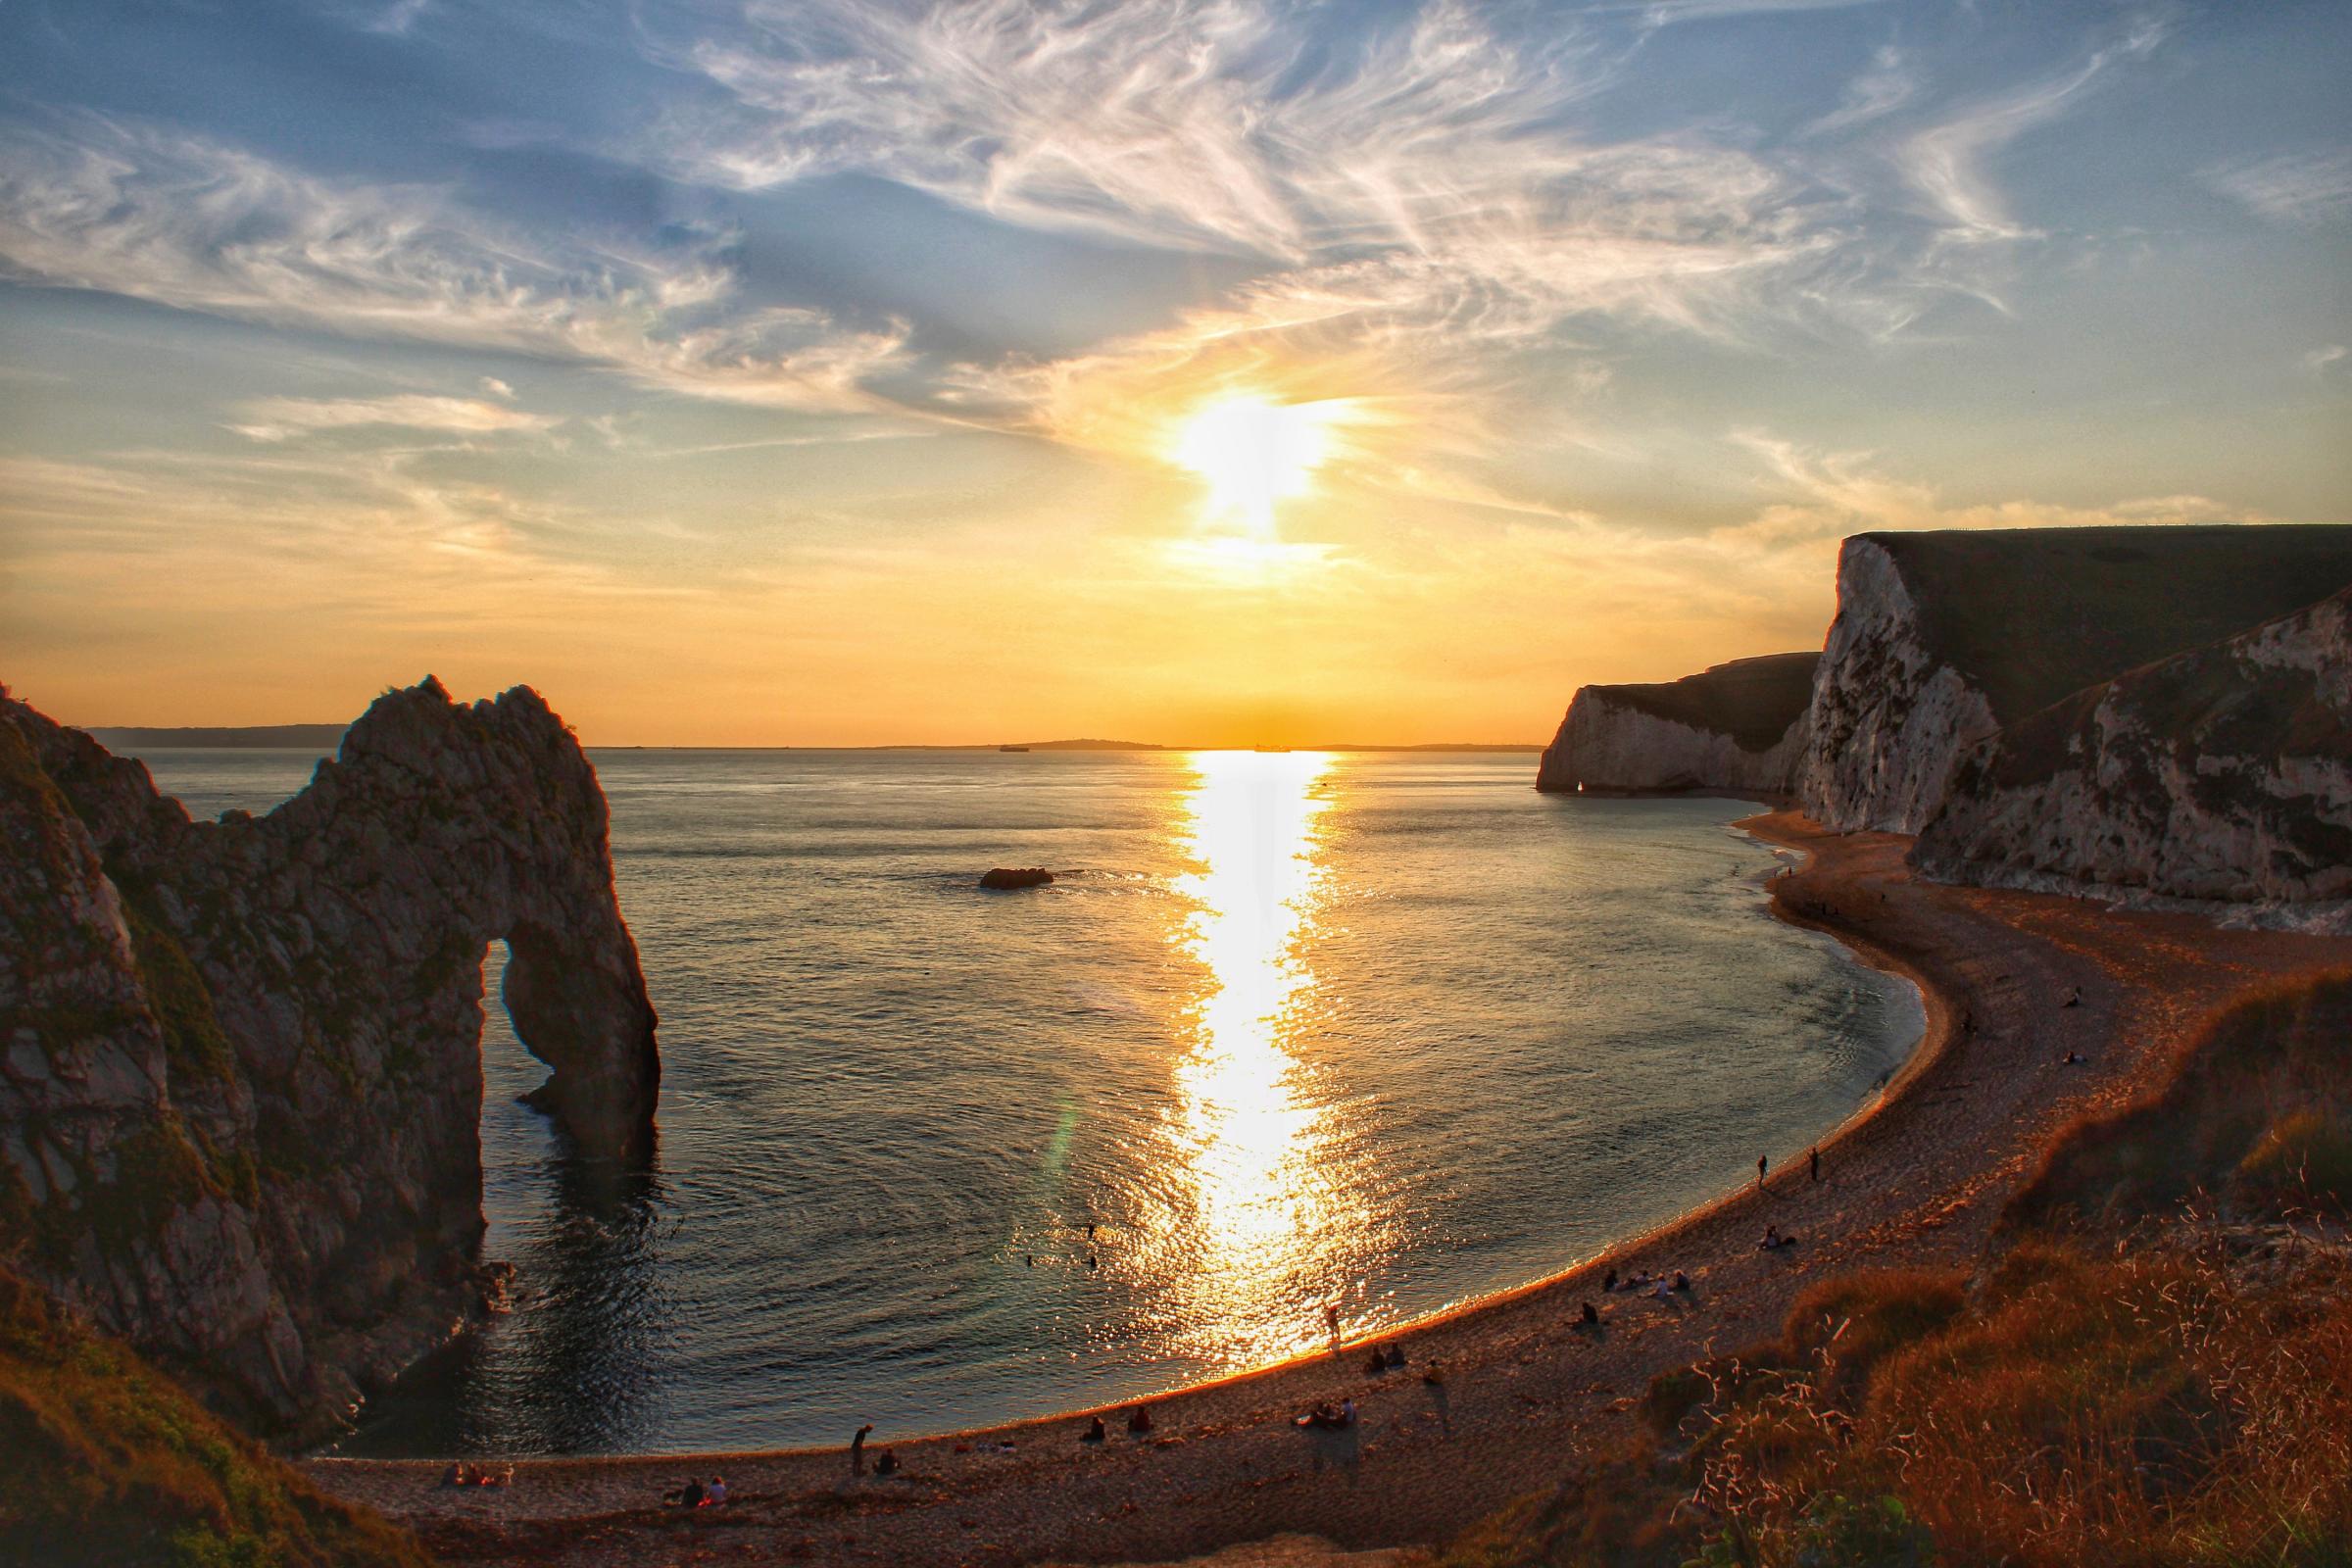 Durdle Door in Dorset, as the sun started to set